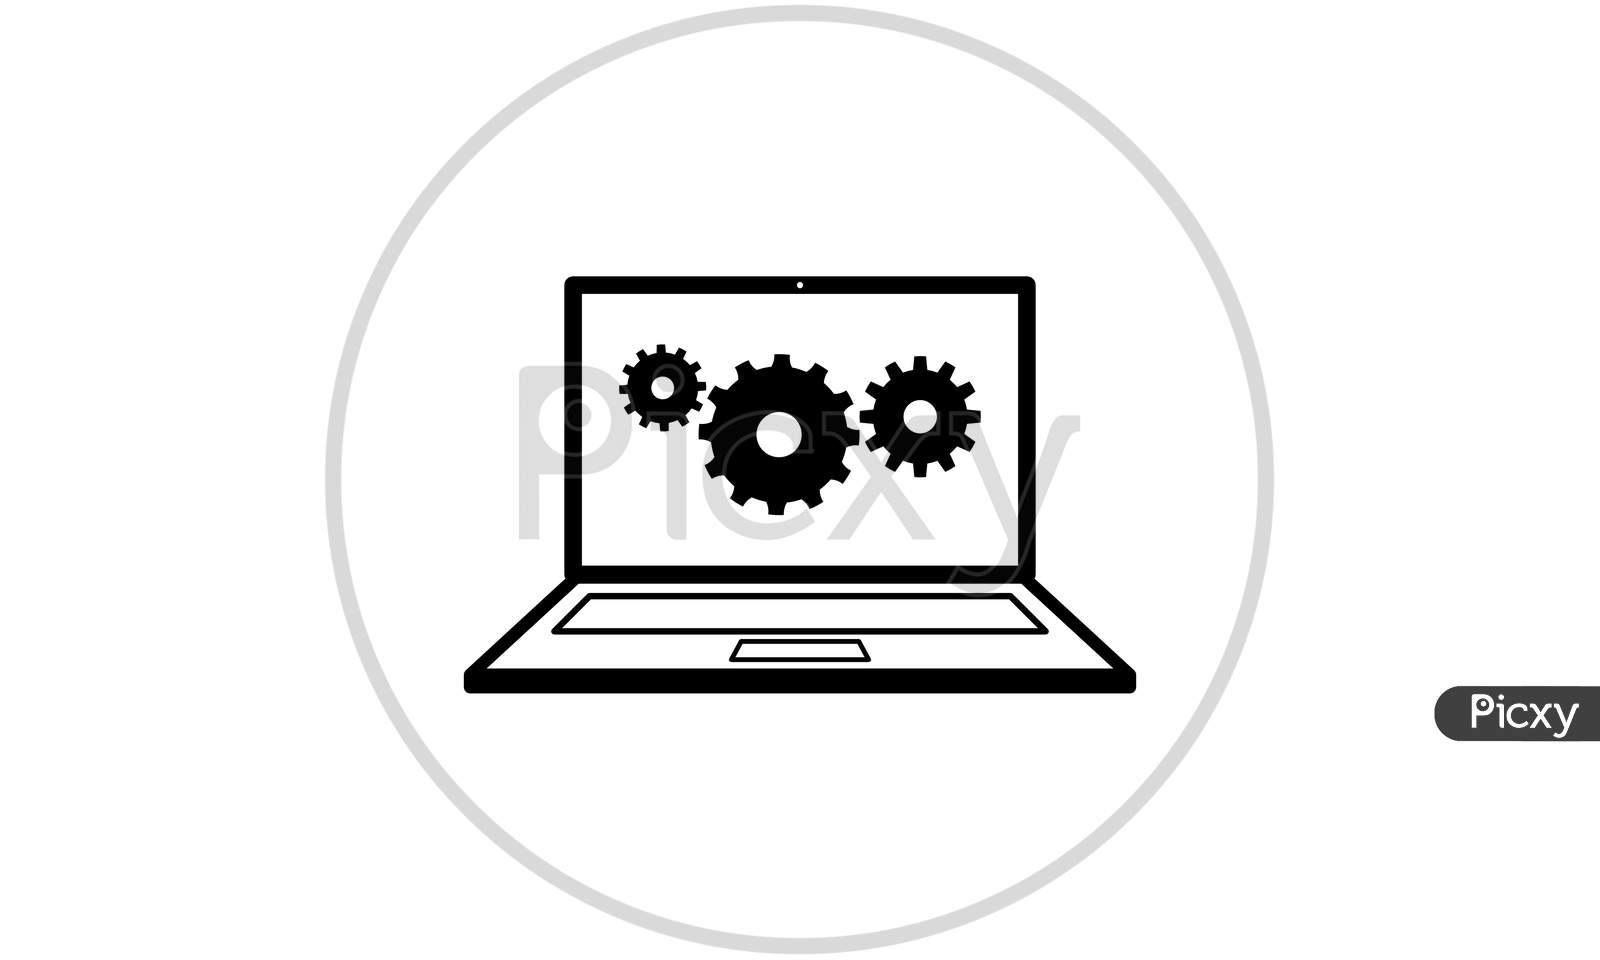 Gears On Laptop Screen Flat Icon On White Background